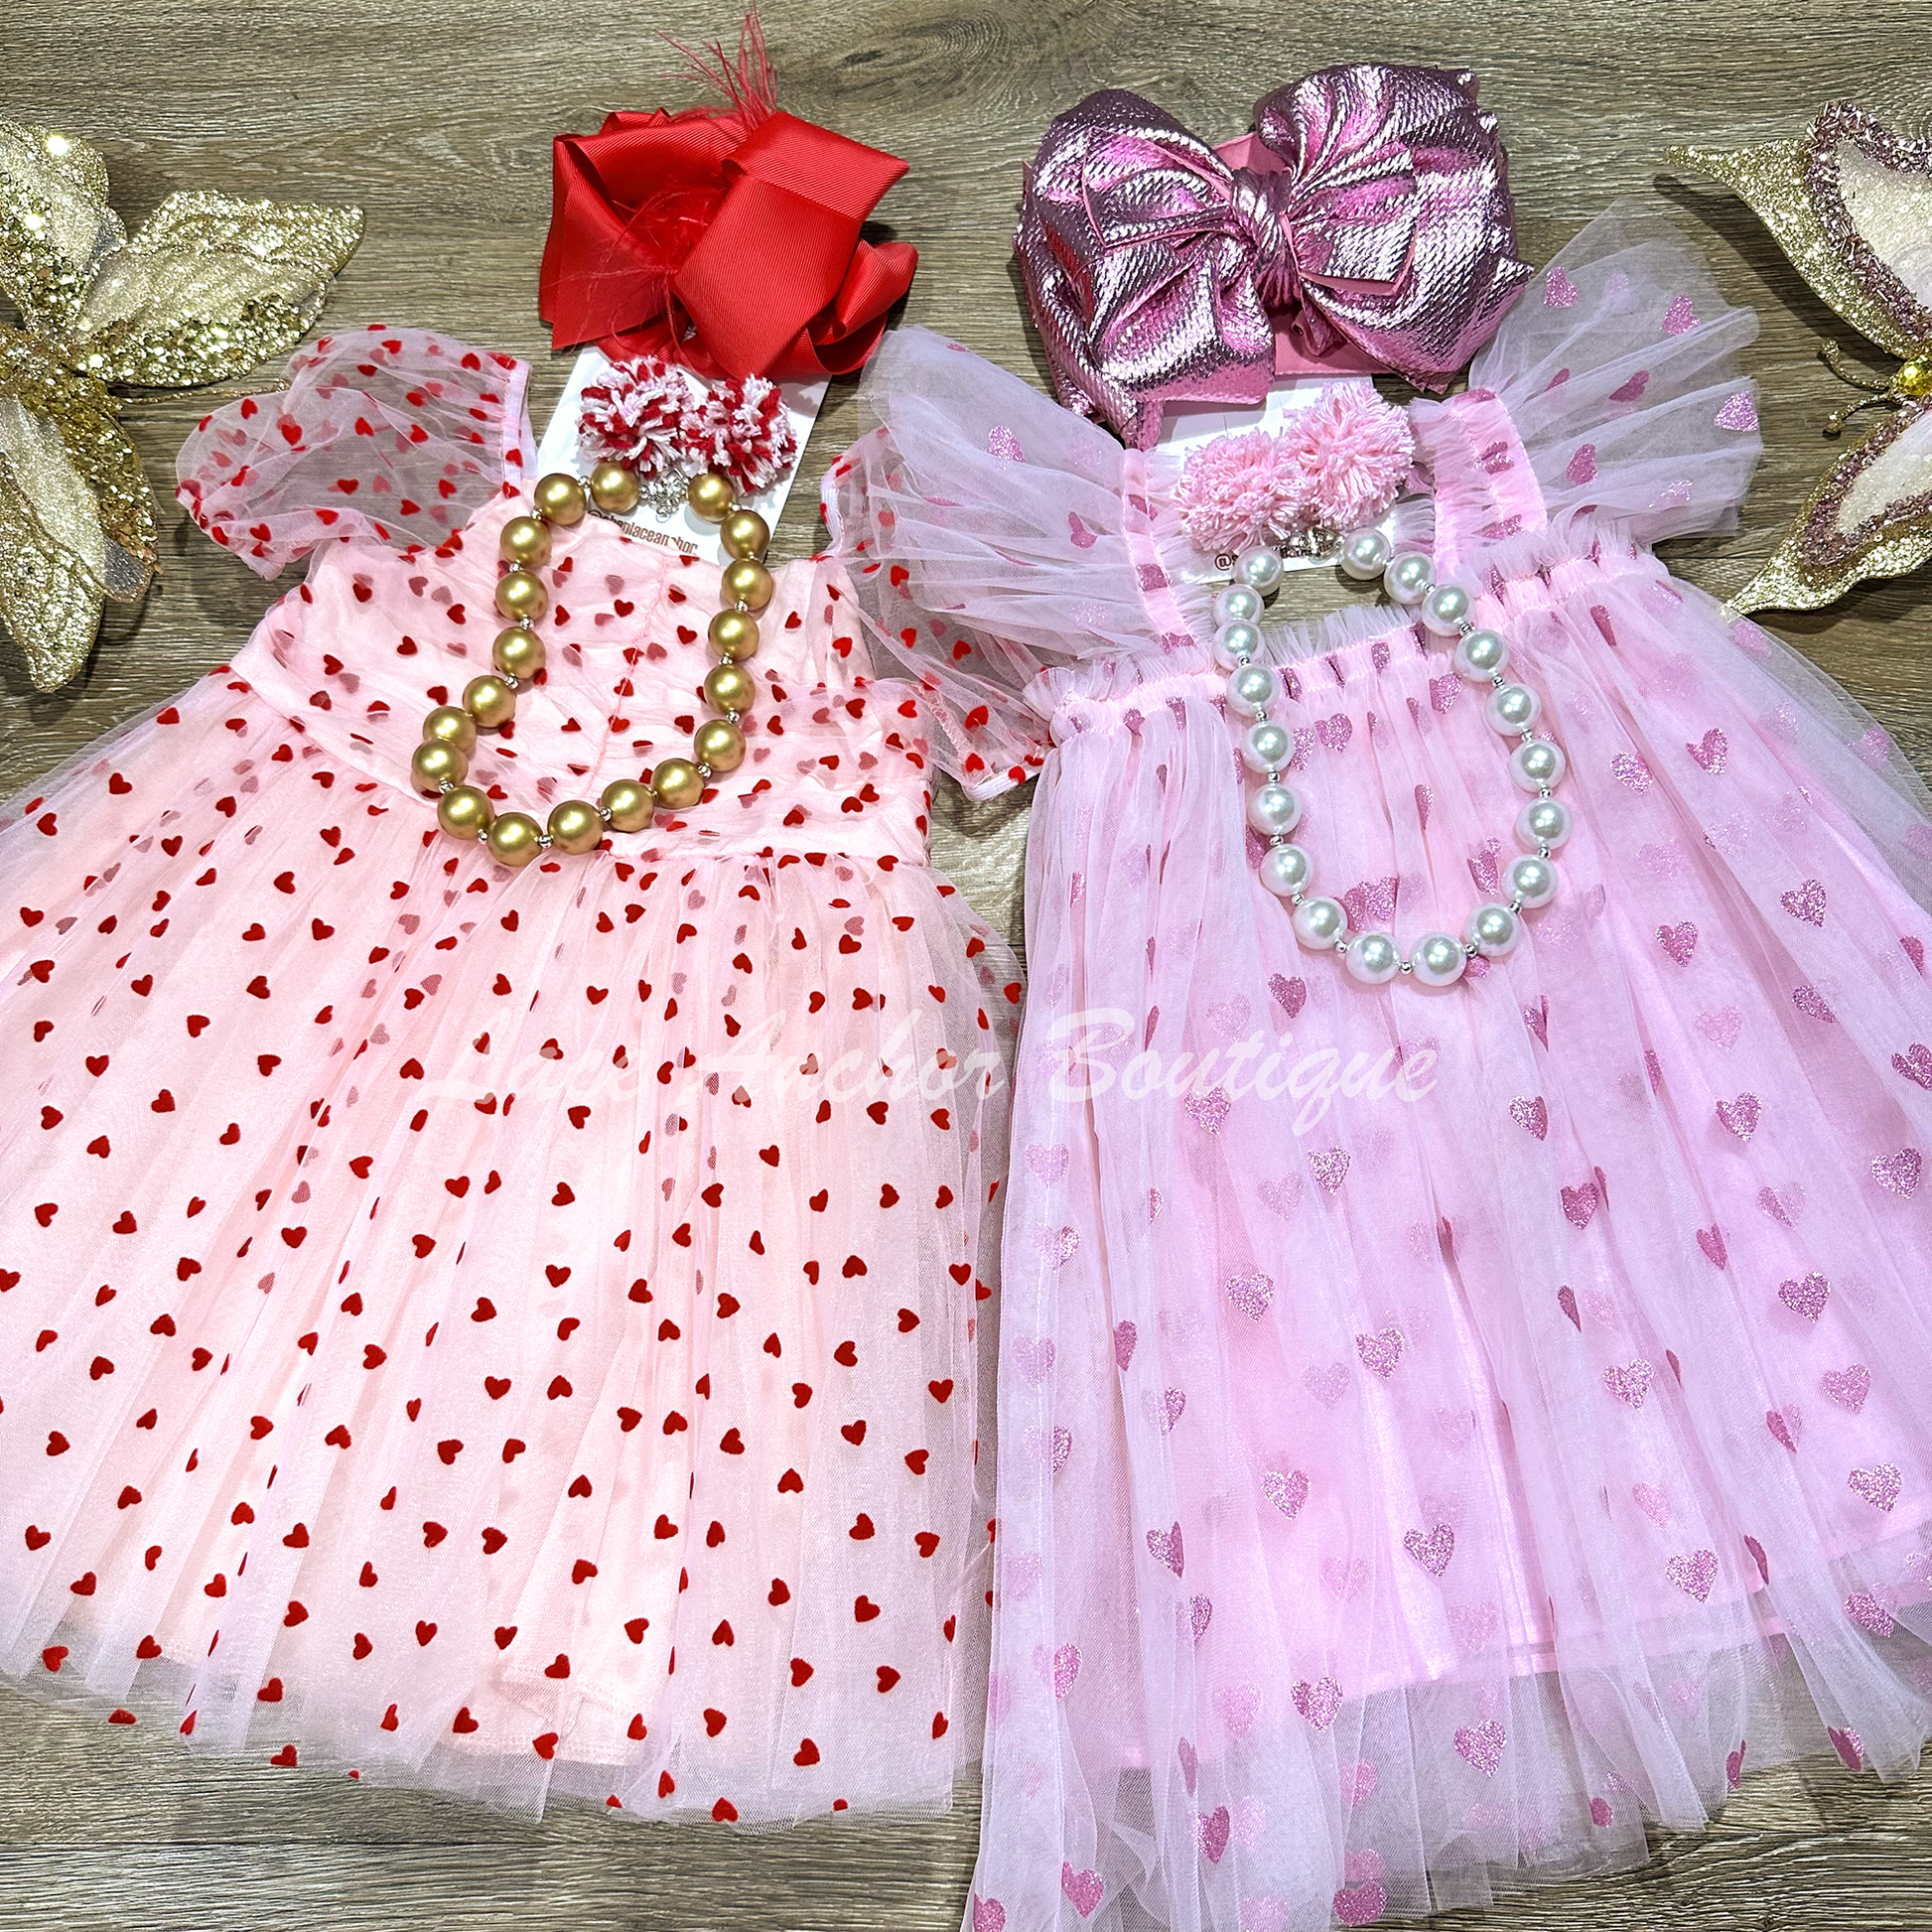 Light pink tulle tutu girls dress with glitter pink hearts and ruffled sleeves.